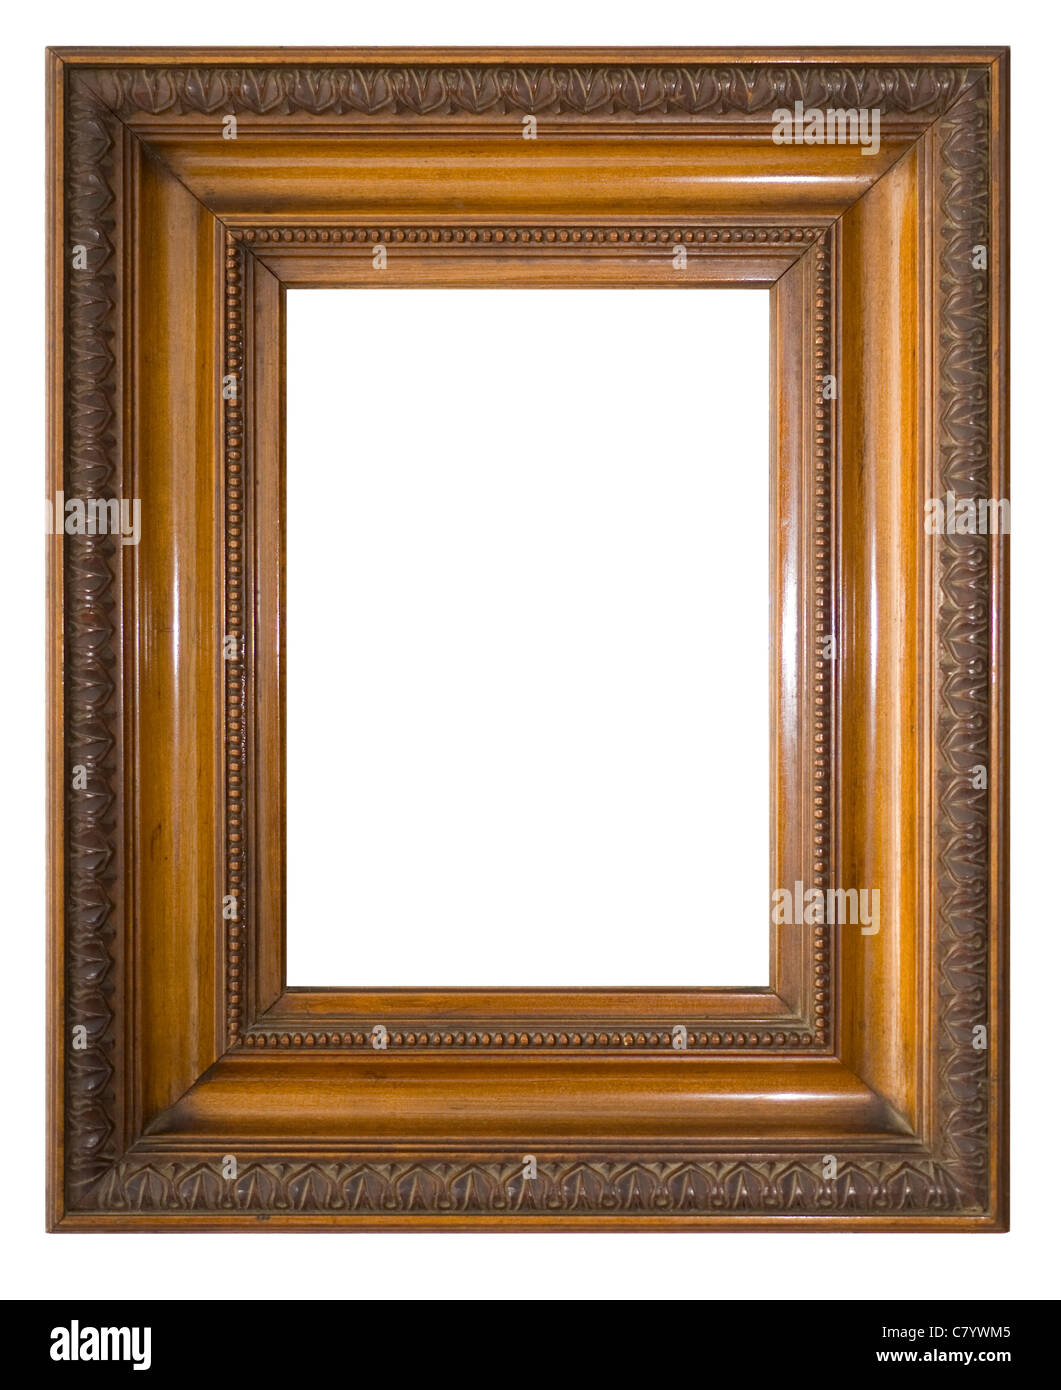 An antique Victorian picture frame, isolated on white with clipping path. Stock Photo